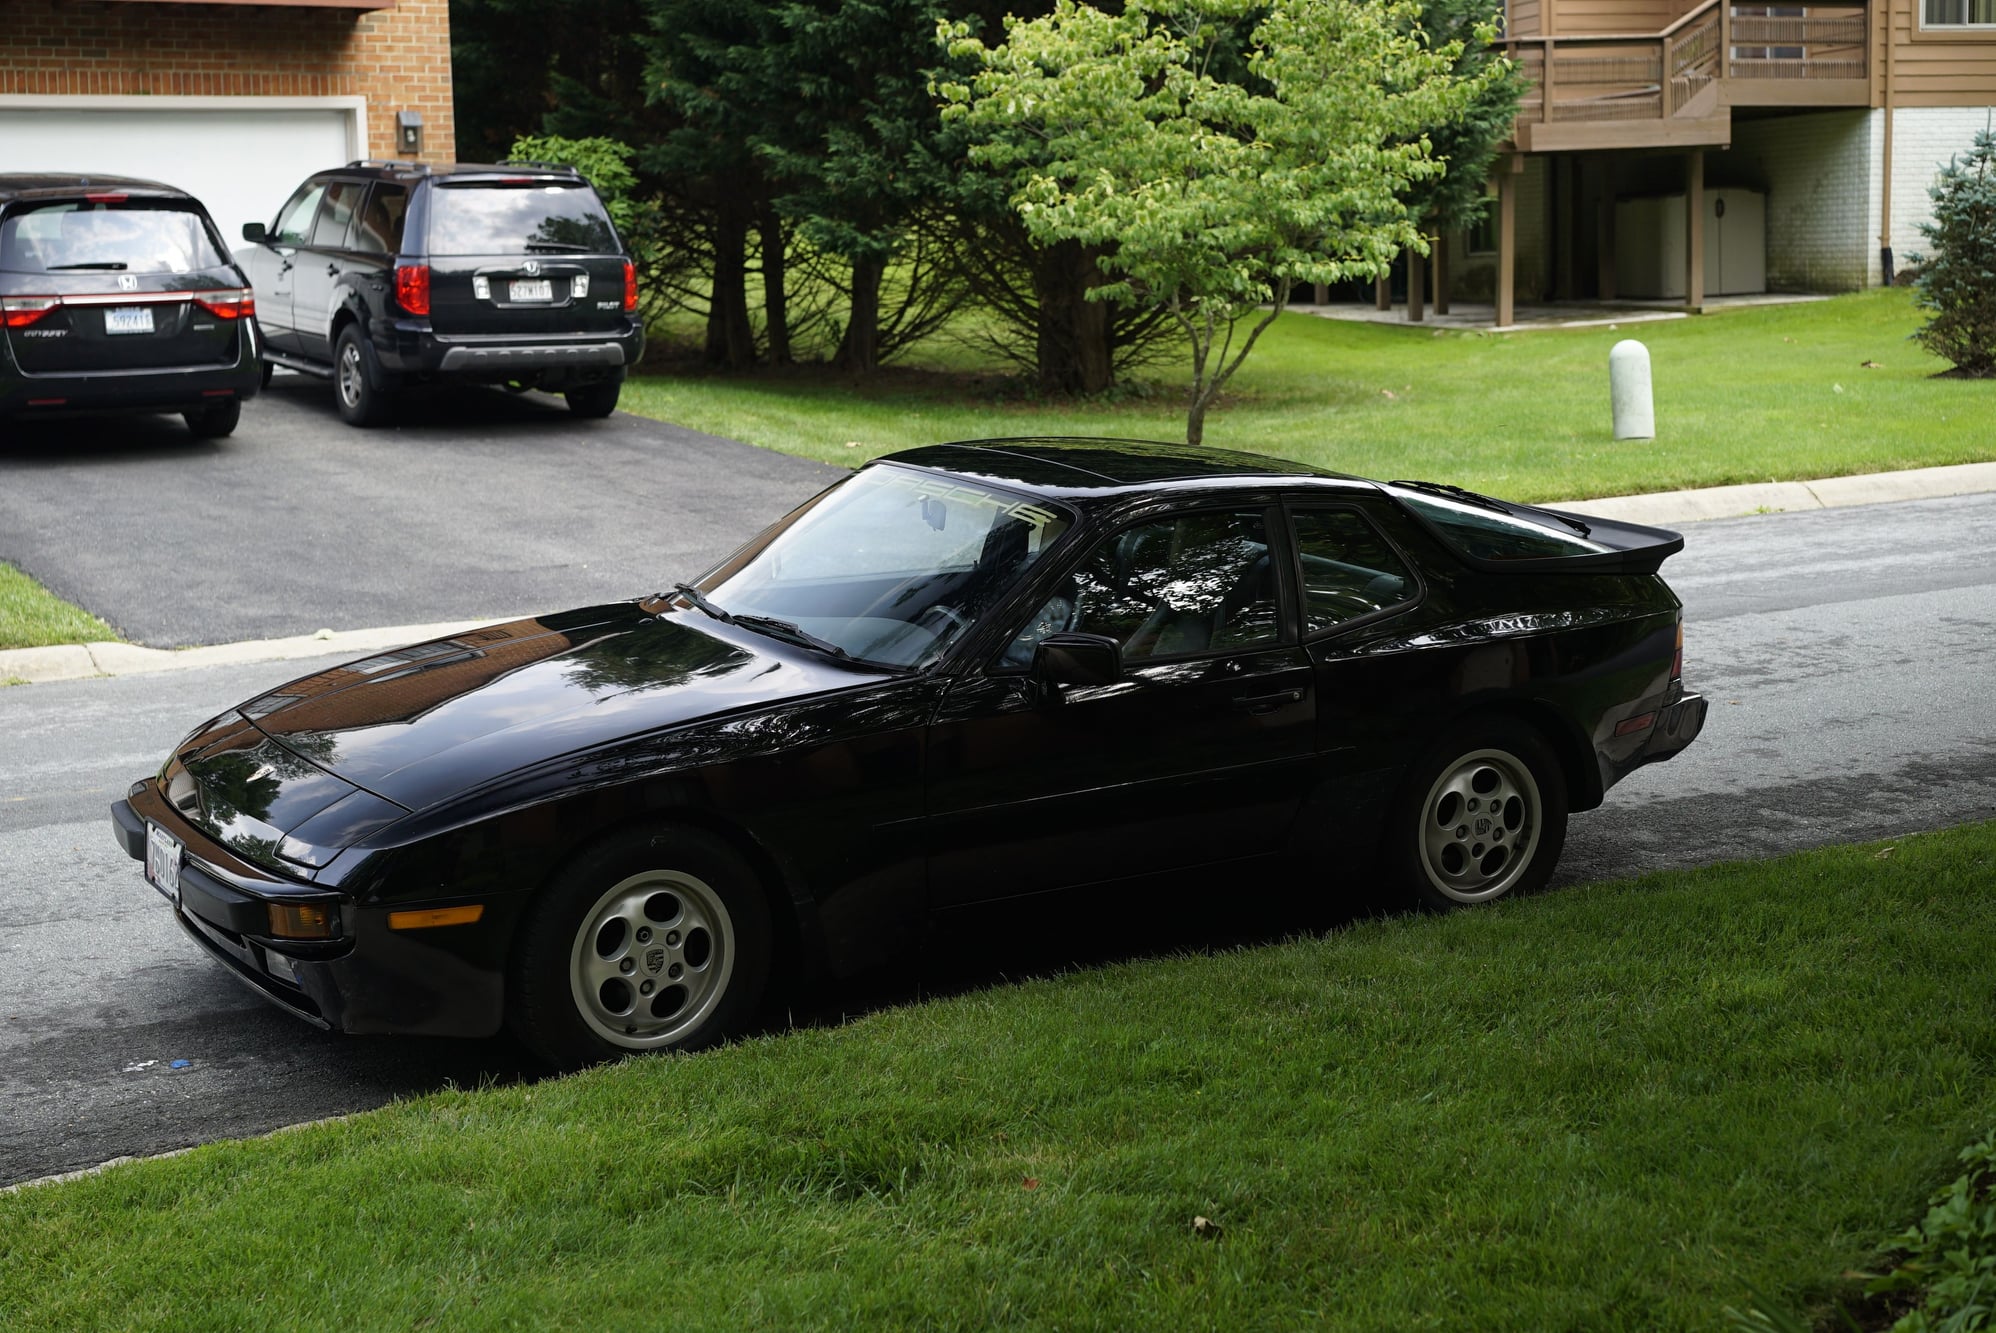 1989 Porsche 944 - 1989 Porsche 944, NA 2.7L - Black - Used - VIN WP0AA0946KN450751 - 115,110 Miles - 4 cyl - 2WD - Manual - Coupe - Black - Potomac, MD 20854, United States